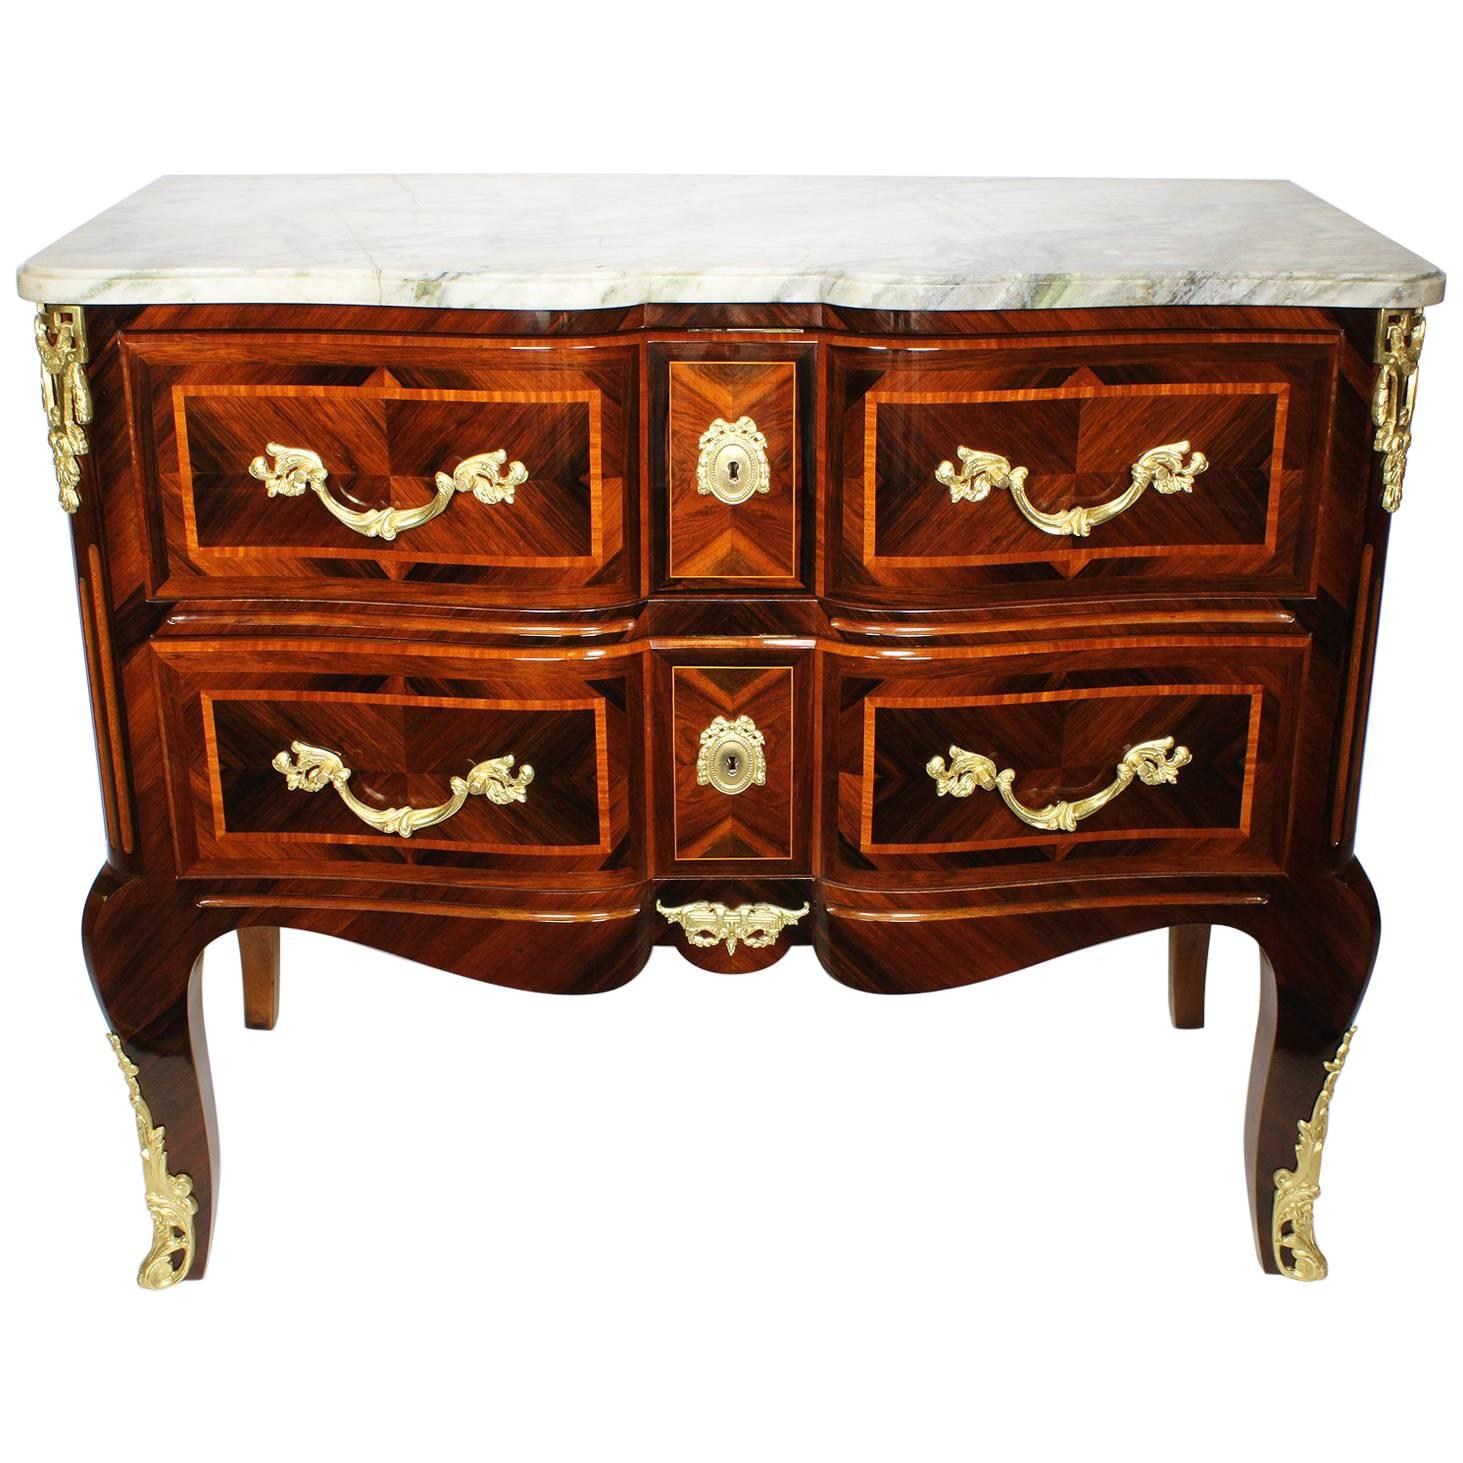 19th Century Regency Style Kingwood and Tulipwood and Ormolu Mounted Commode For Sale